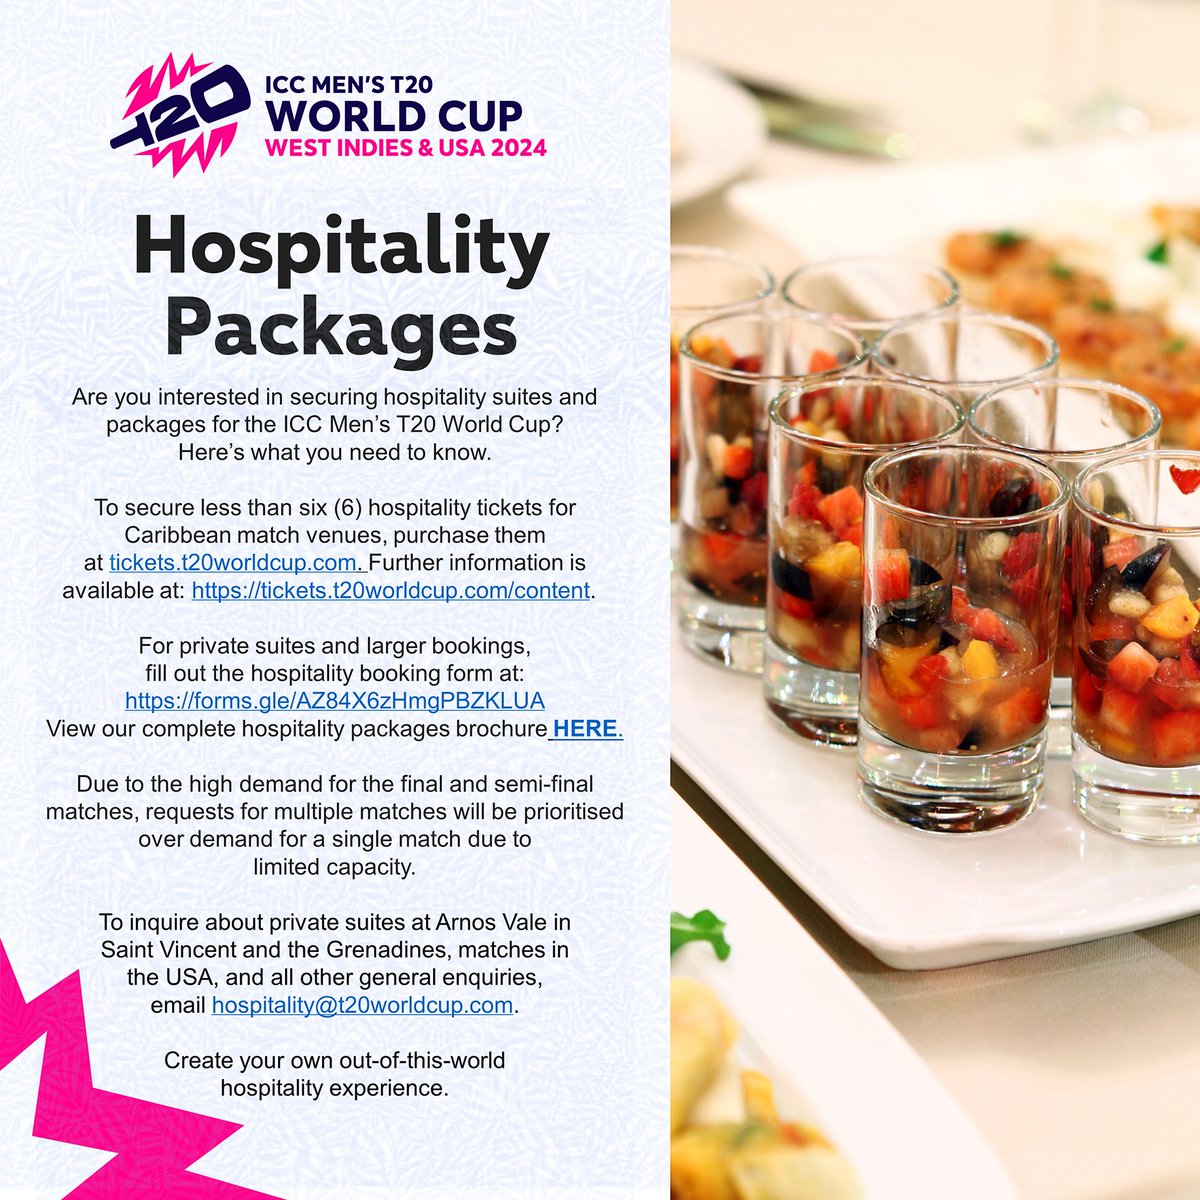 ICC Men's T20 World Cup 2024 hospitality packages on sale now! View and download our hospitality brochure HERE ▶️ bit.ly/3waEySd For general hospitality package inquiries, email us at: hospitality@t20worldcup.com #T20WorldCup #OutOfThisWorld